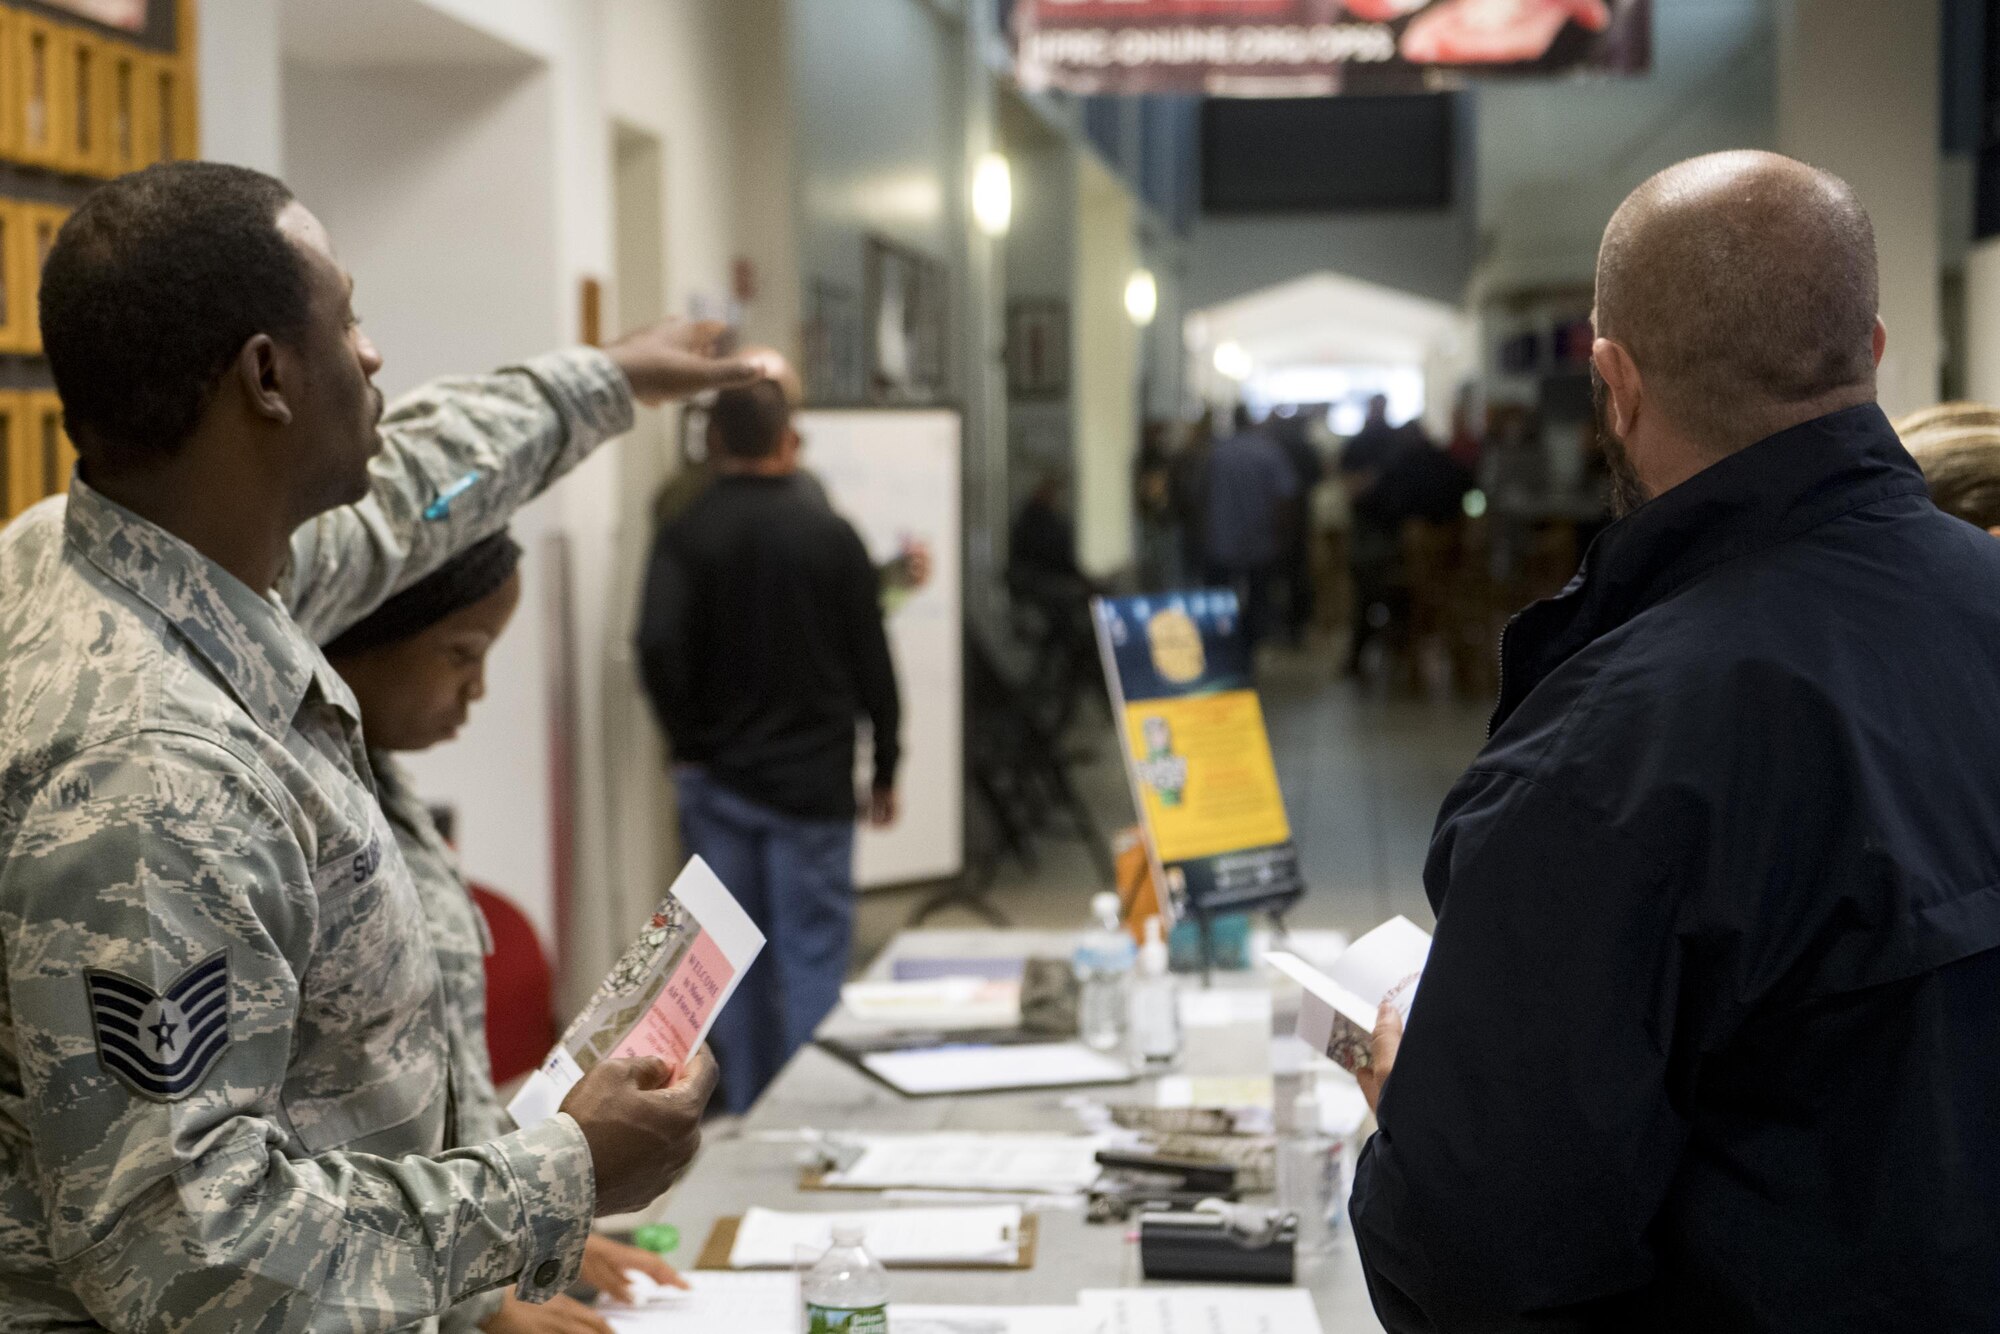 U.S. Air Force Tech. Sgt. Gerrod Suber, 23d Force Support Squadron personnel specialist, directs members from various federal law enforcement agencies through in-processing procedures, Sept. 10, 2017, at Moody Air Force Base, Ga. Moody Air Force Base hosted approximately 400 members from 14 different federal agencies who will deploy to conduct security or search and rescue missions in areas effected by Hurricane Irma. (U.S. Air Force photo by Airman 1st Class Daniel Snider)